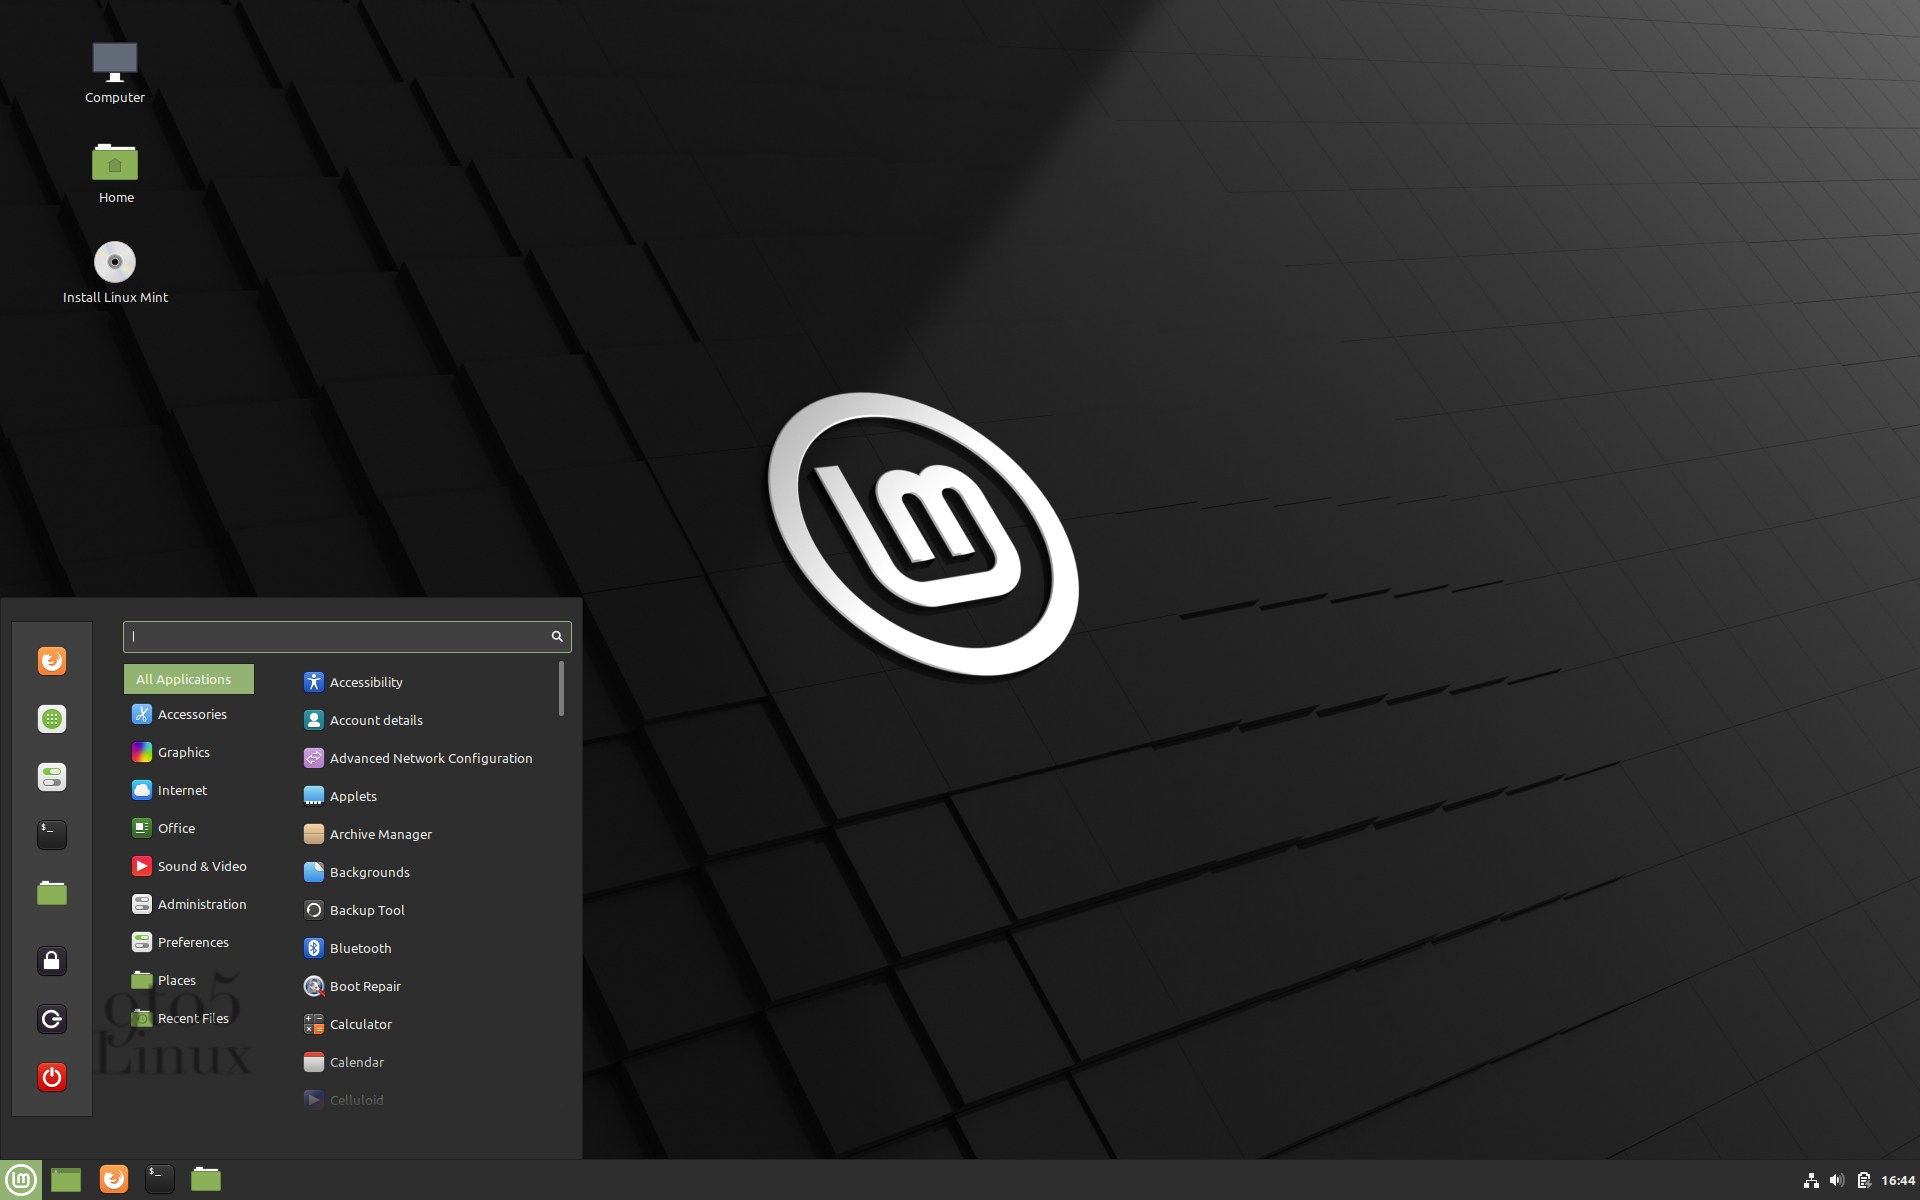 You Can Now Upgrade from Linux Mint 20 to Linux Mint 20.1, Here’s How